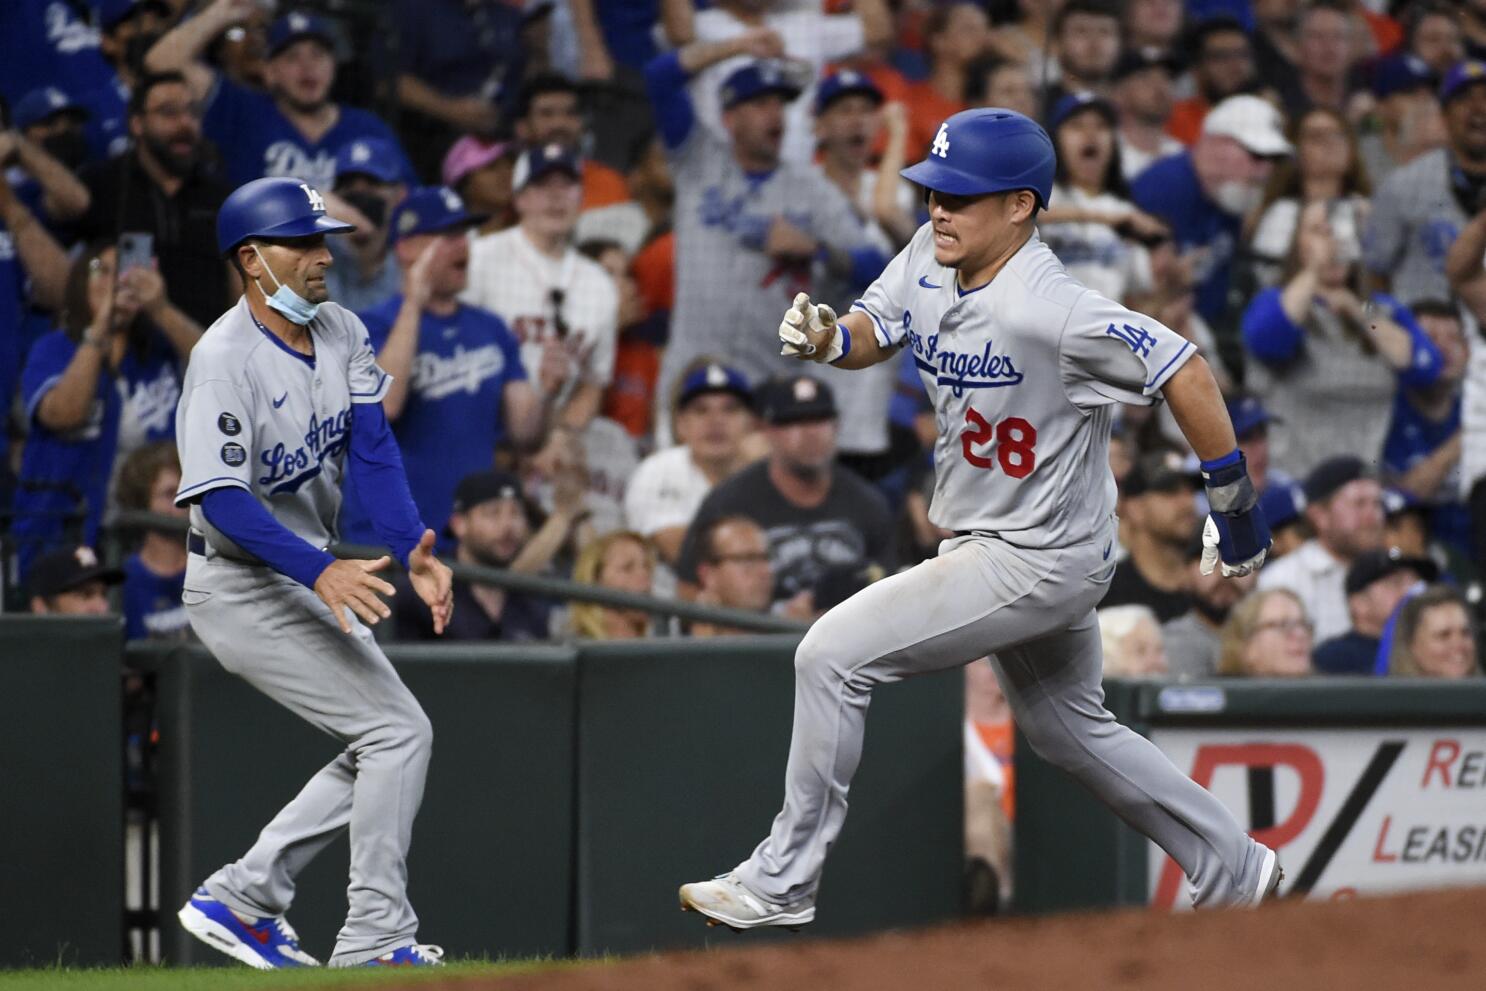 Los Angeles Dodgers Hype Video 2021  The Road 2 Repeat Starts Now for the  World Series Champs! 